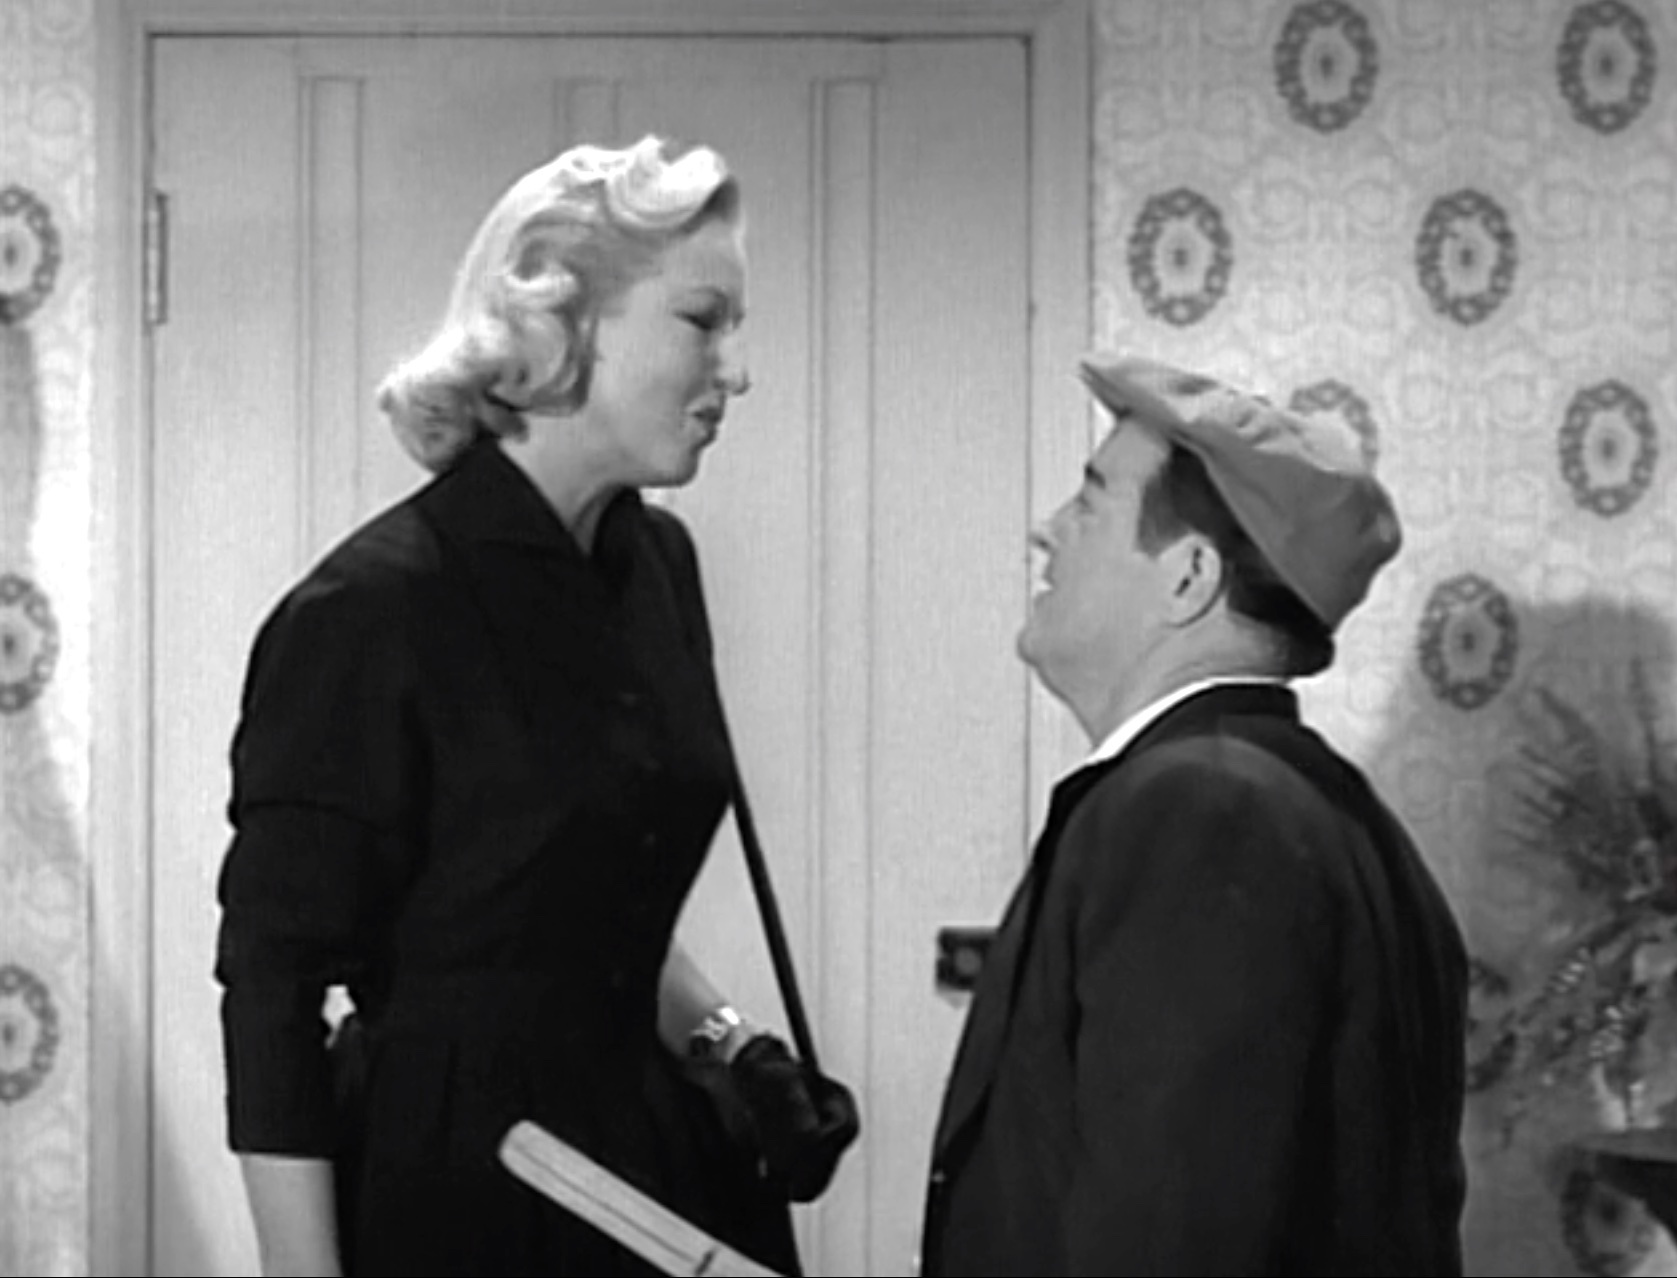 Lou Costello says goodbye to Hillary Brooke in "The Vacation" - The Abbott and Costello Show